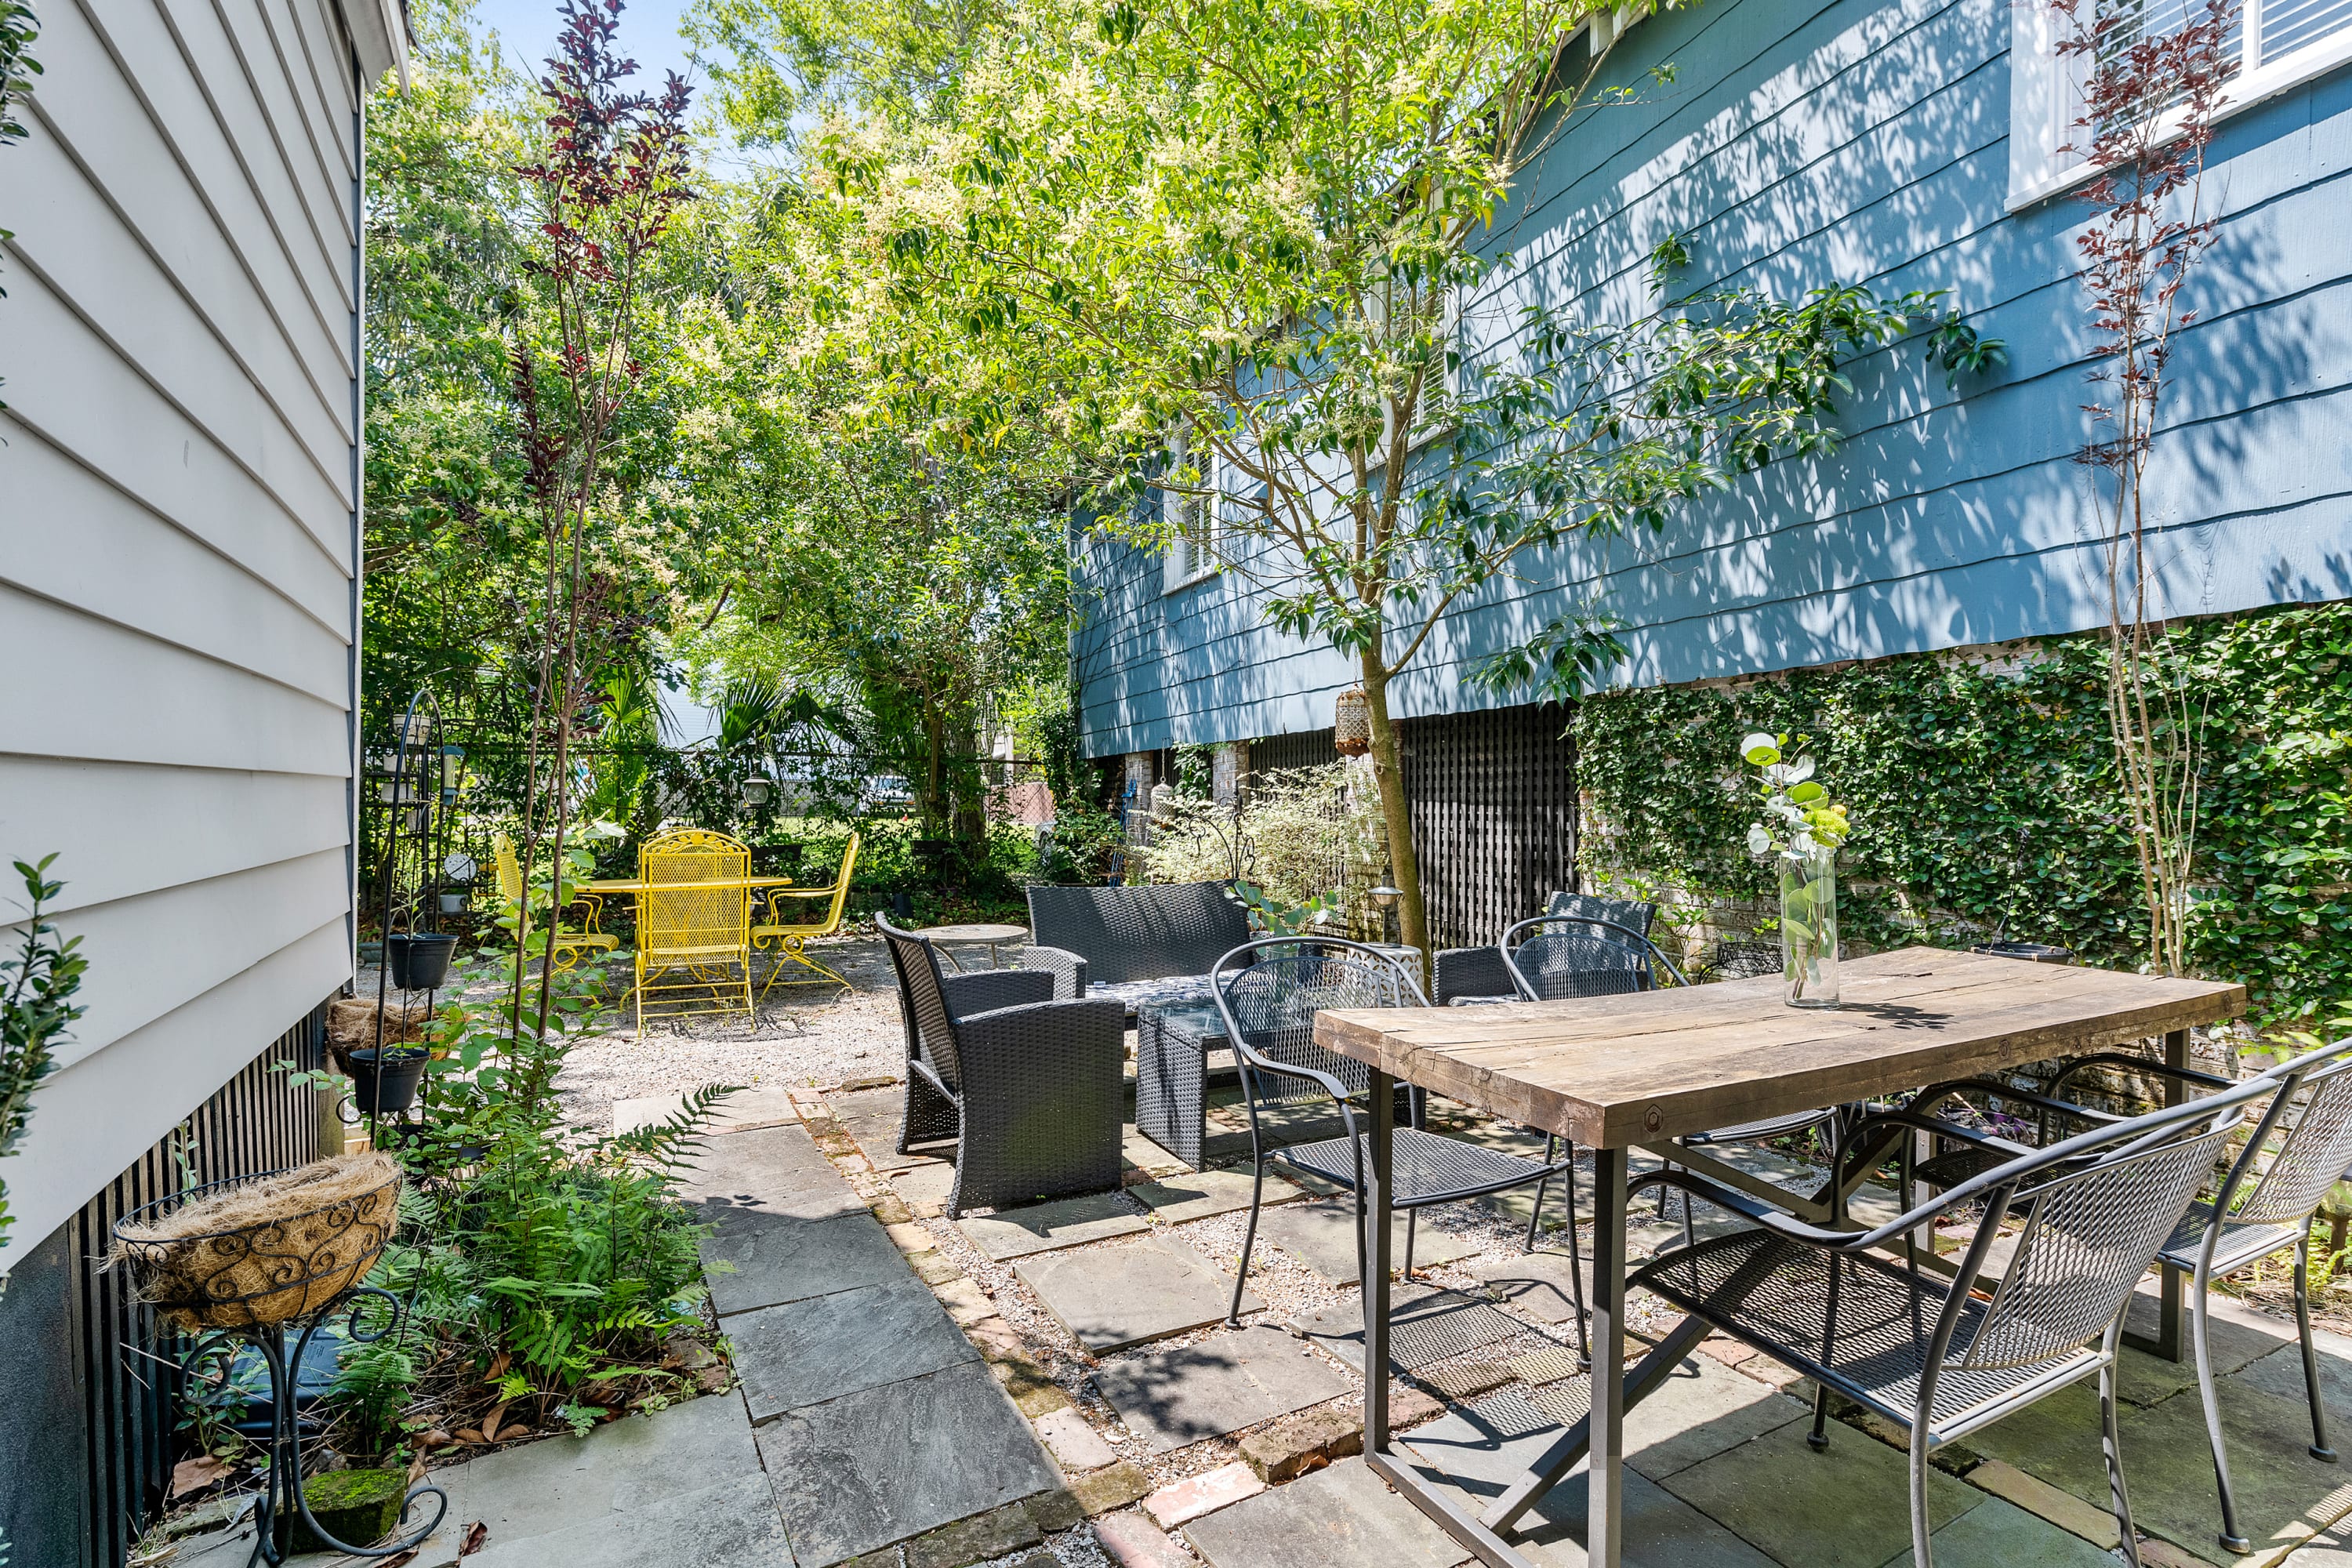 Backyard space with plenty of seating for your group